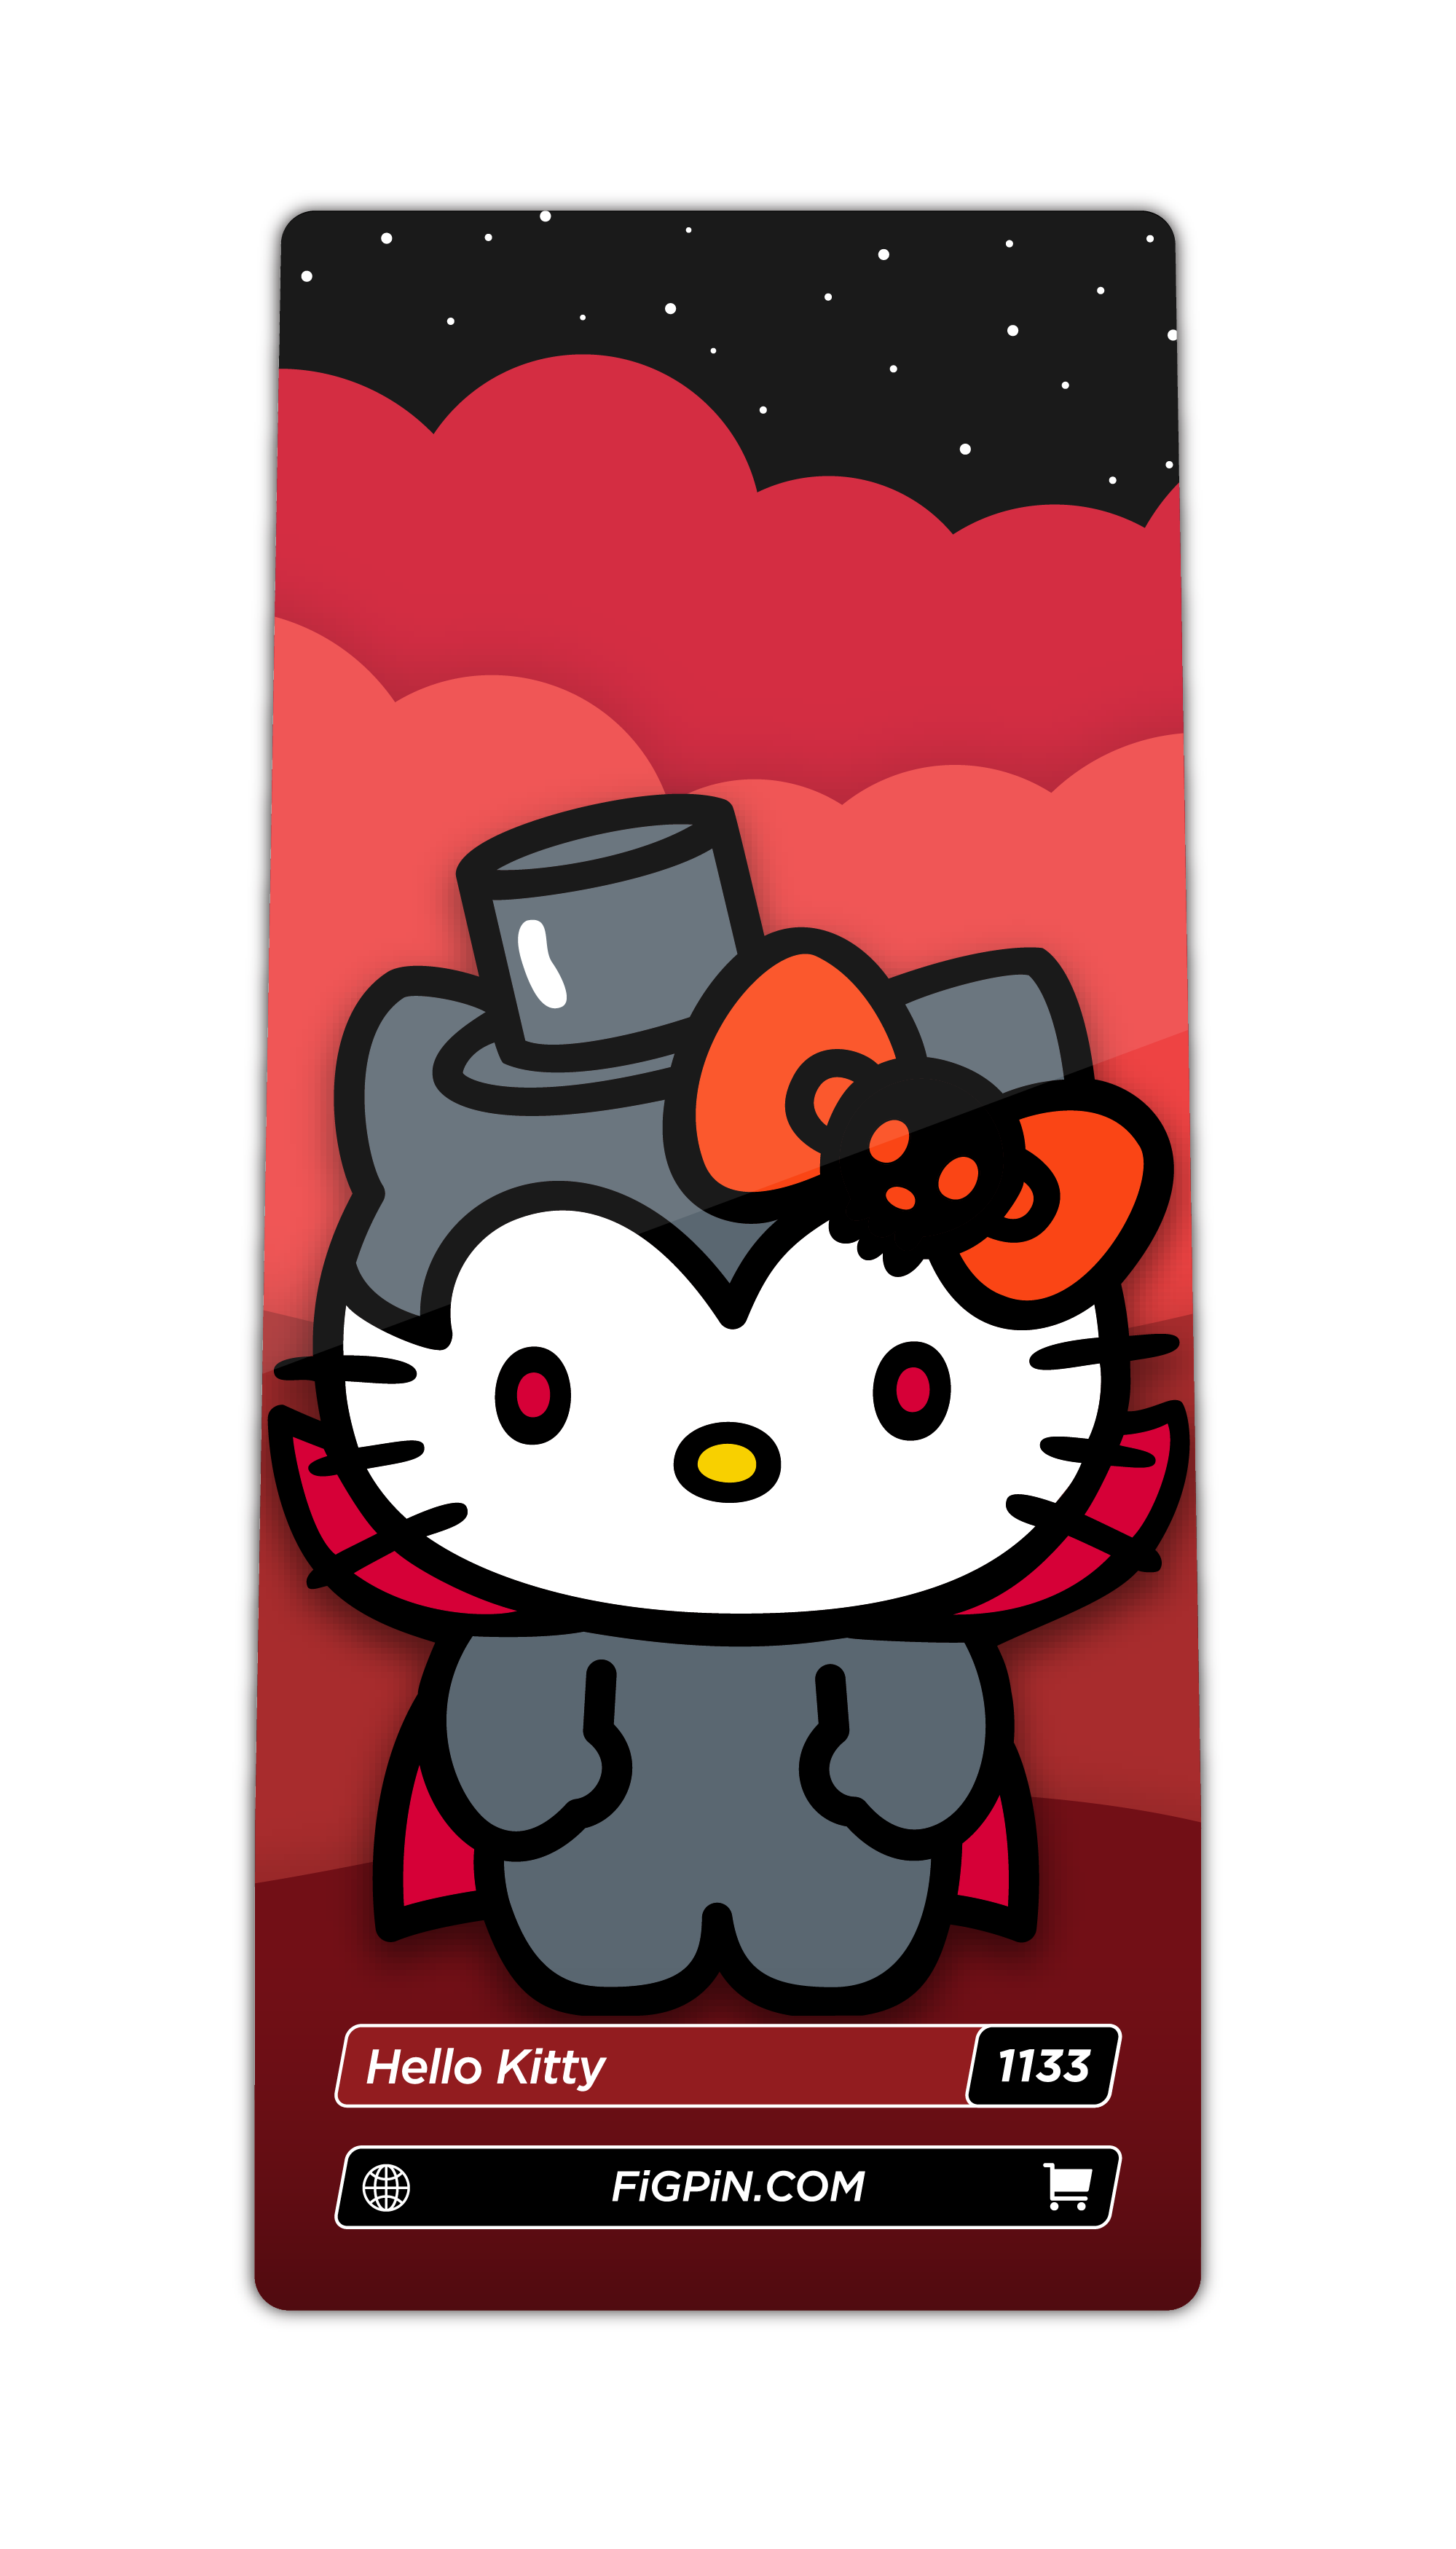 Character card of Sanrio's Hello Kitty with text “Hello Kitty (1133)” and link to FiGPiN’s website